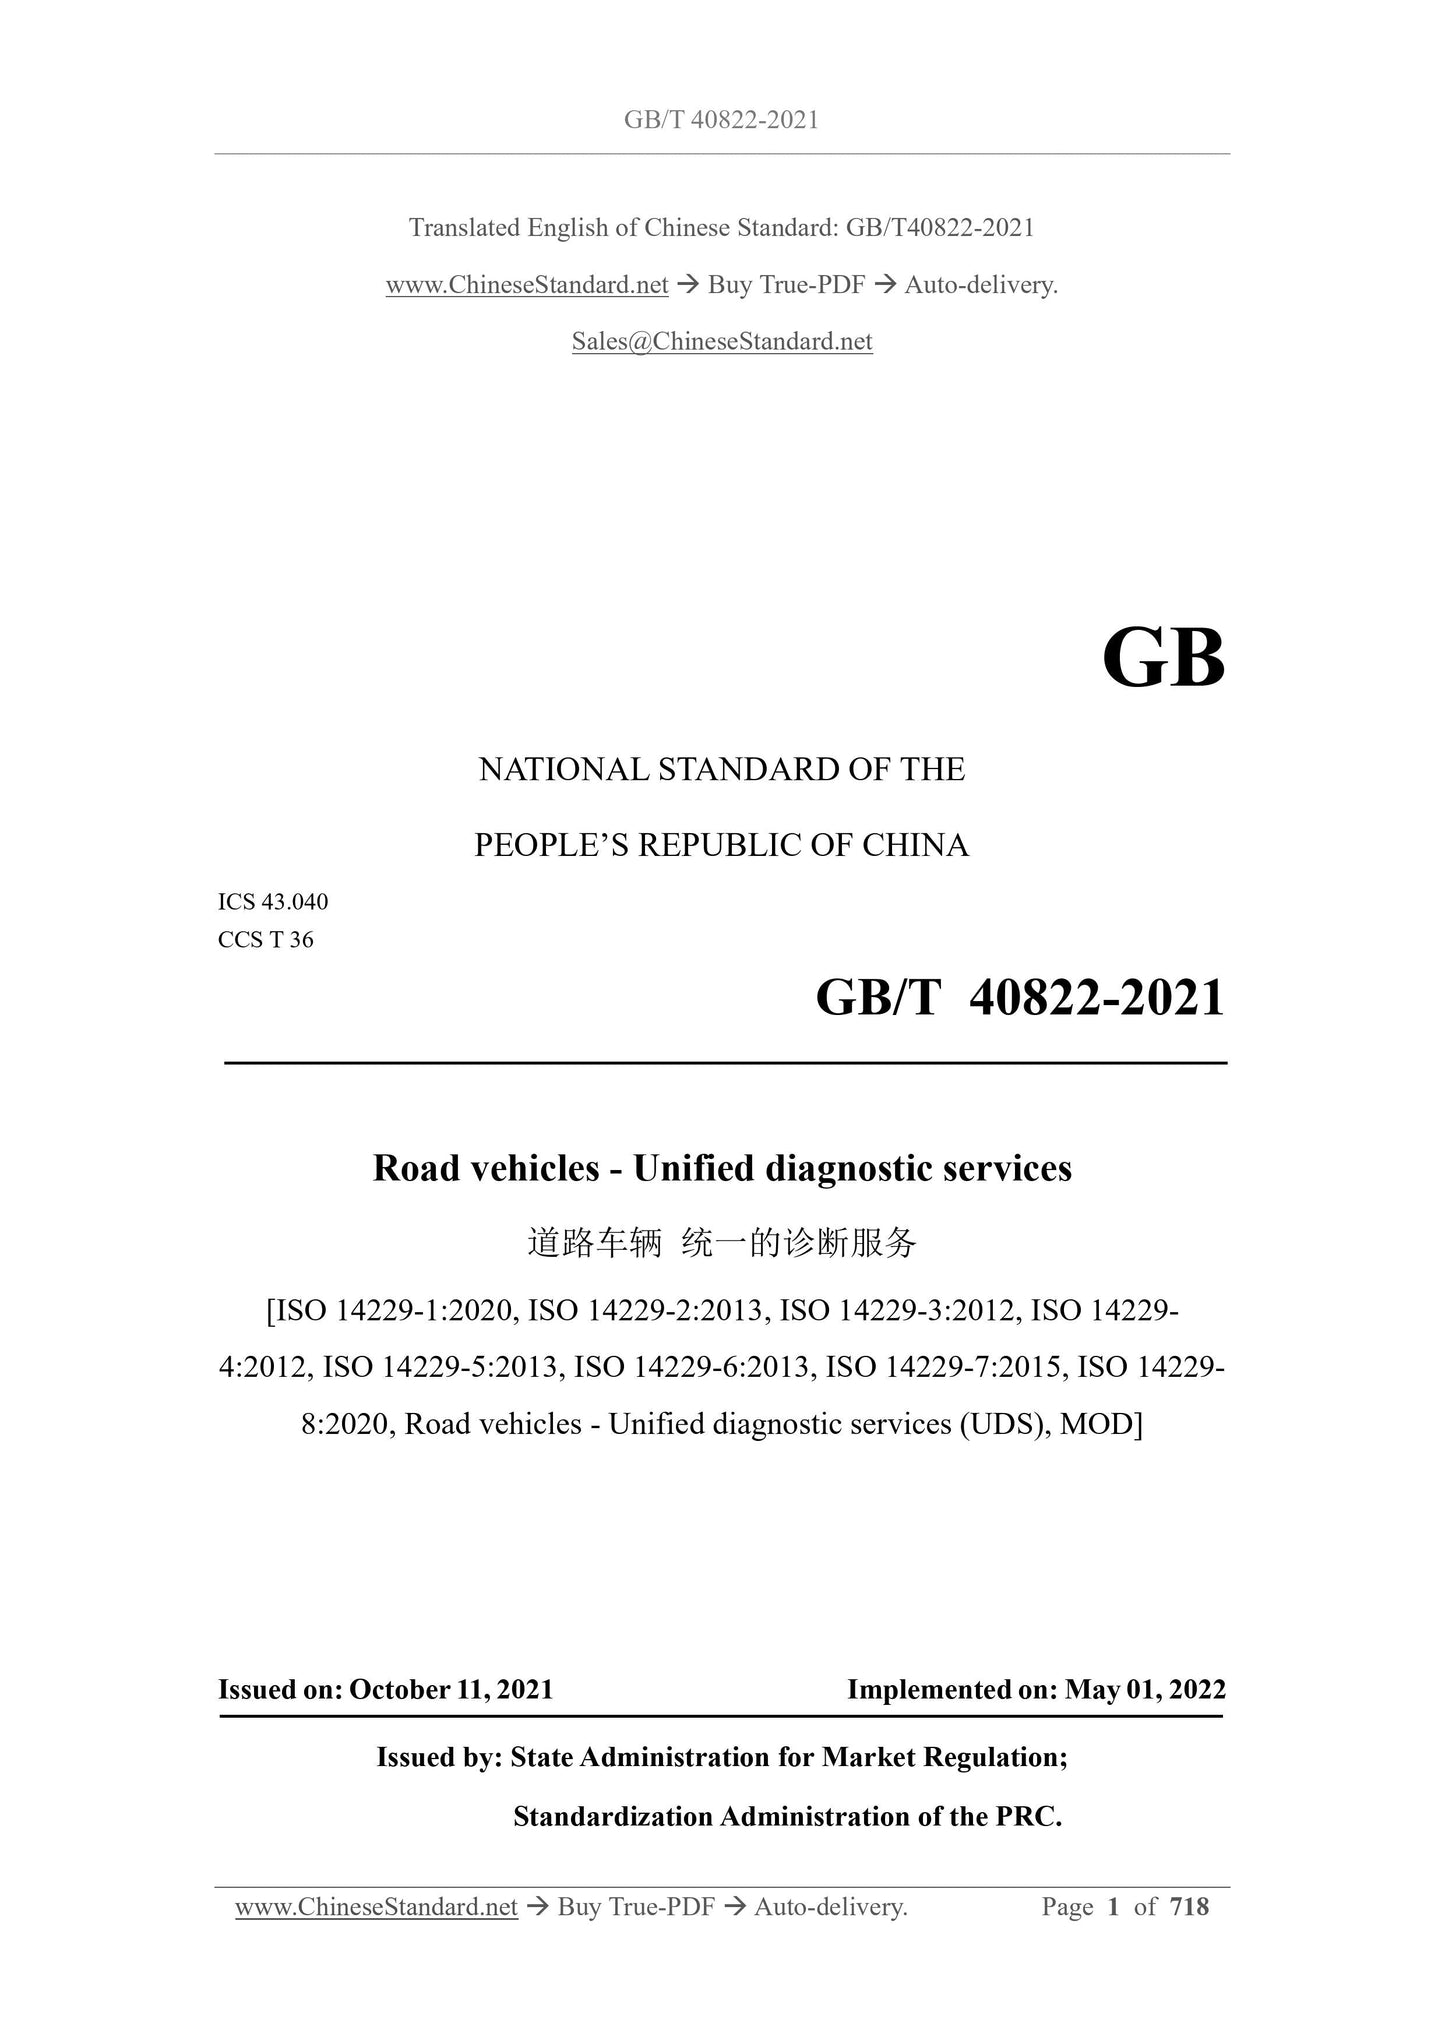 GB/T 40822-2021 Page 1